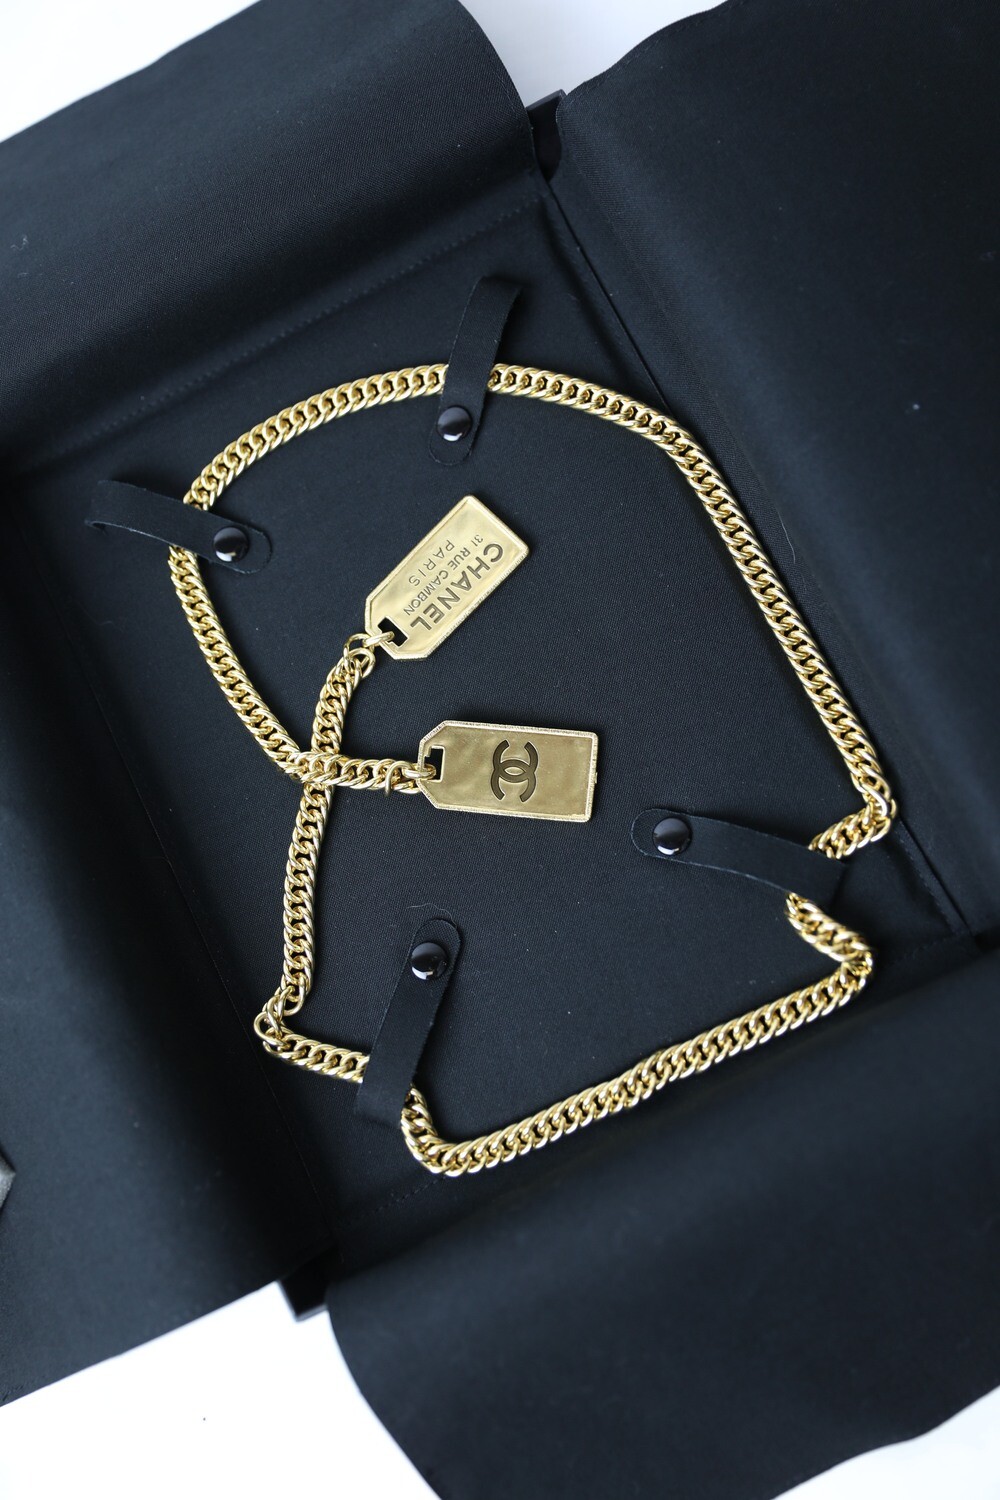 Chanel Dog Tag Necklace Gold Tone, New in Box WA001